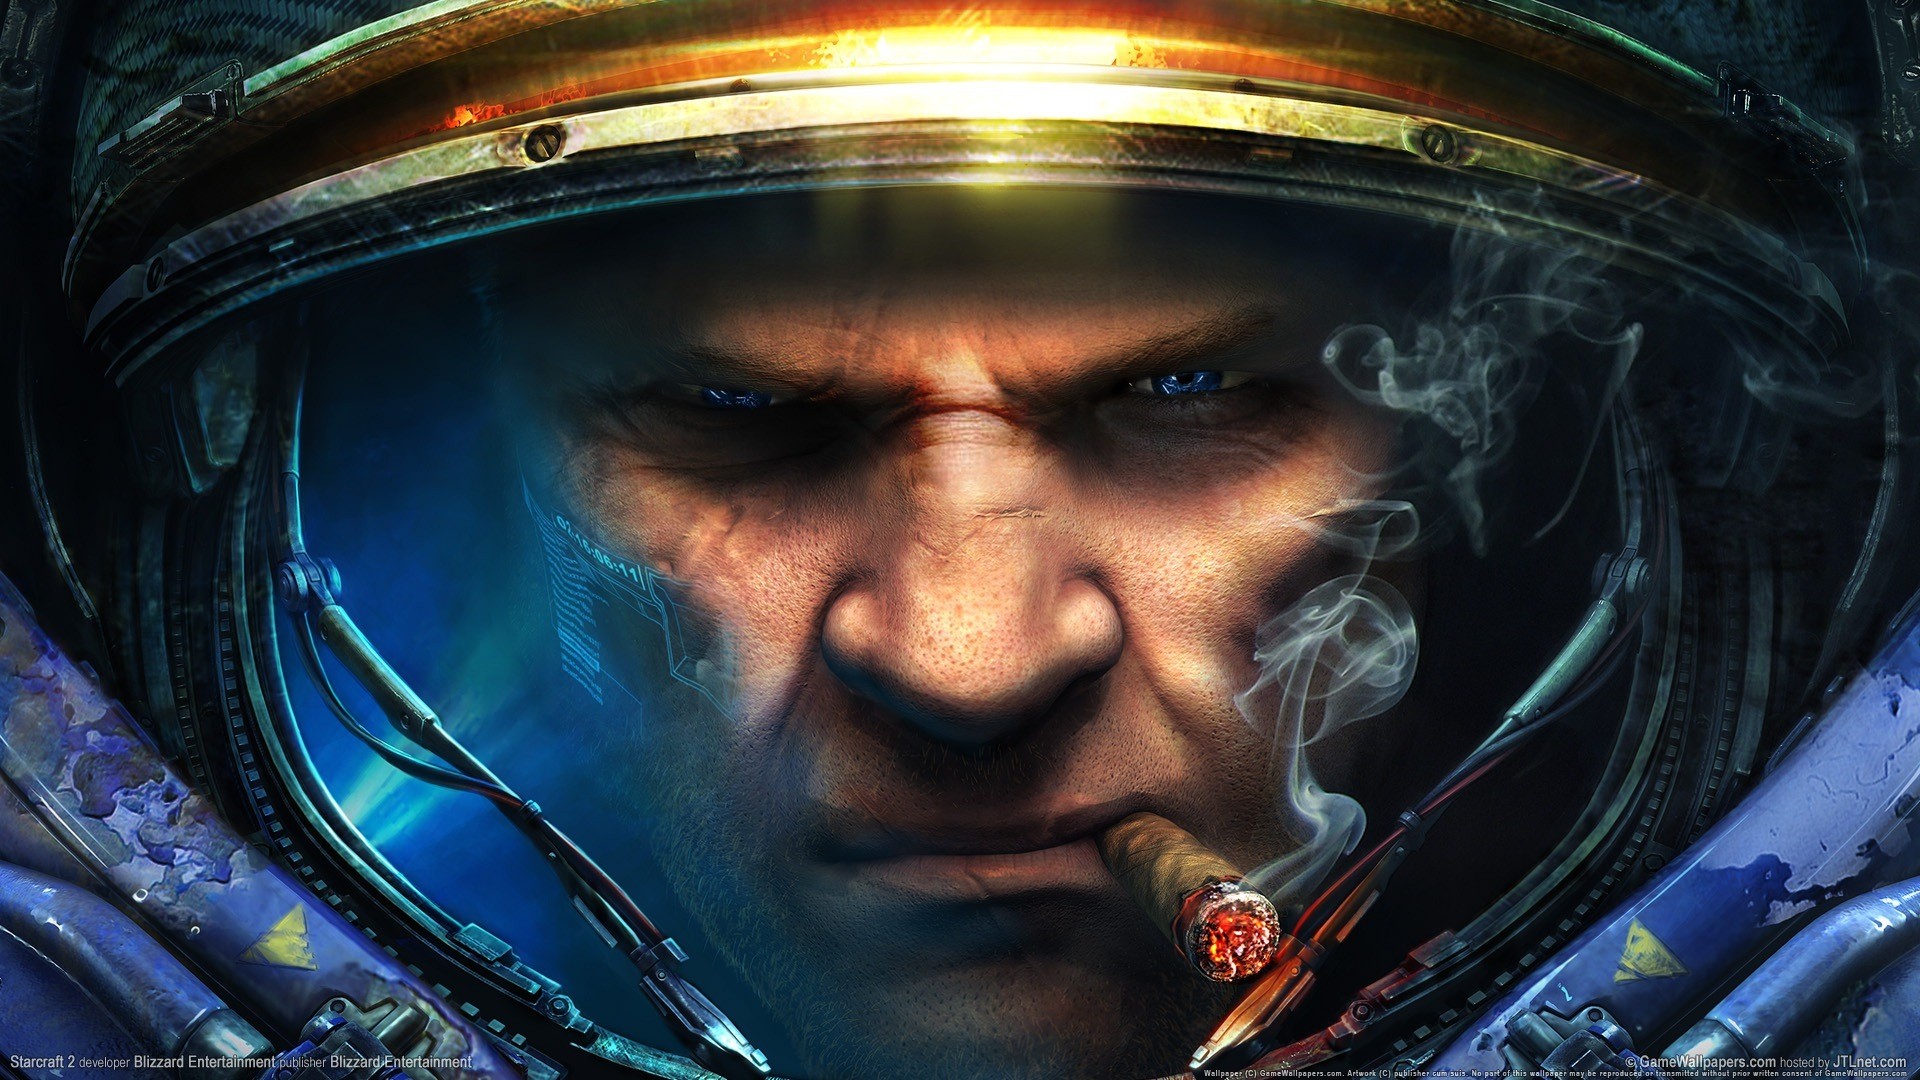 General 1920x1080 video games Blizzard Entertainment PC gaming cigars Starcraft II Science Fiction Men science fiction men face smoking video game art